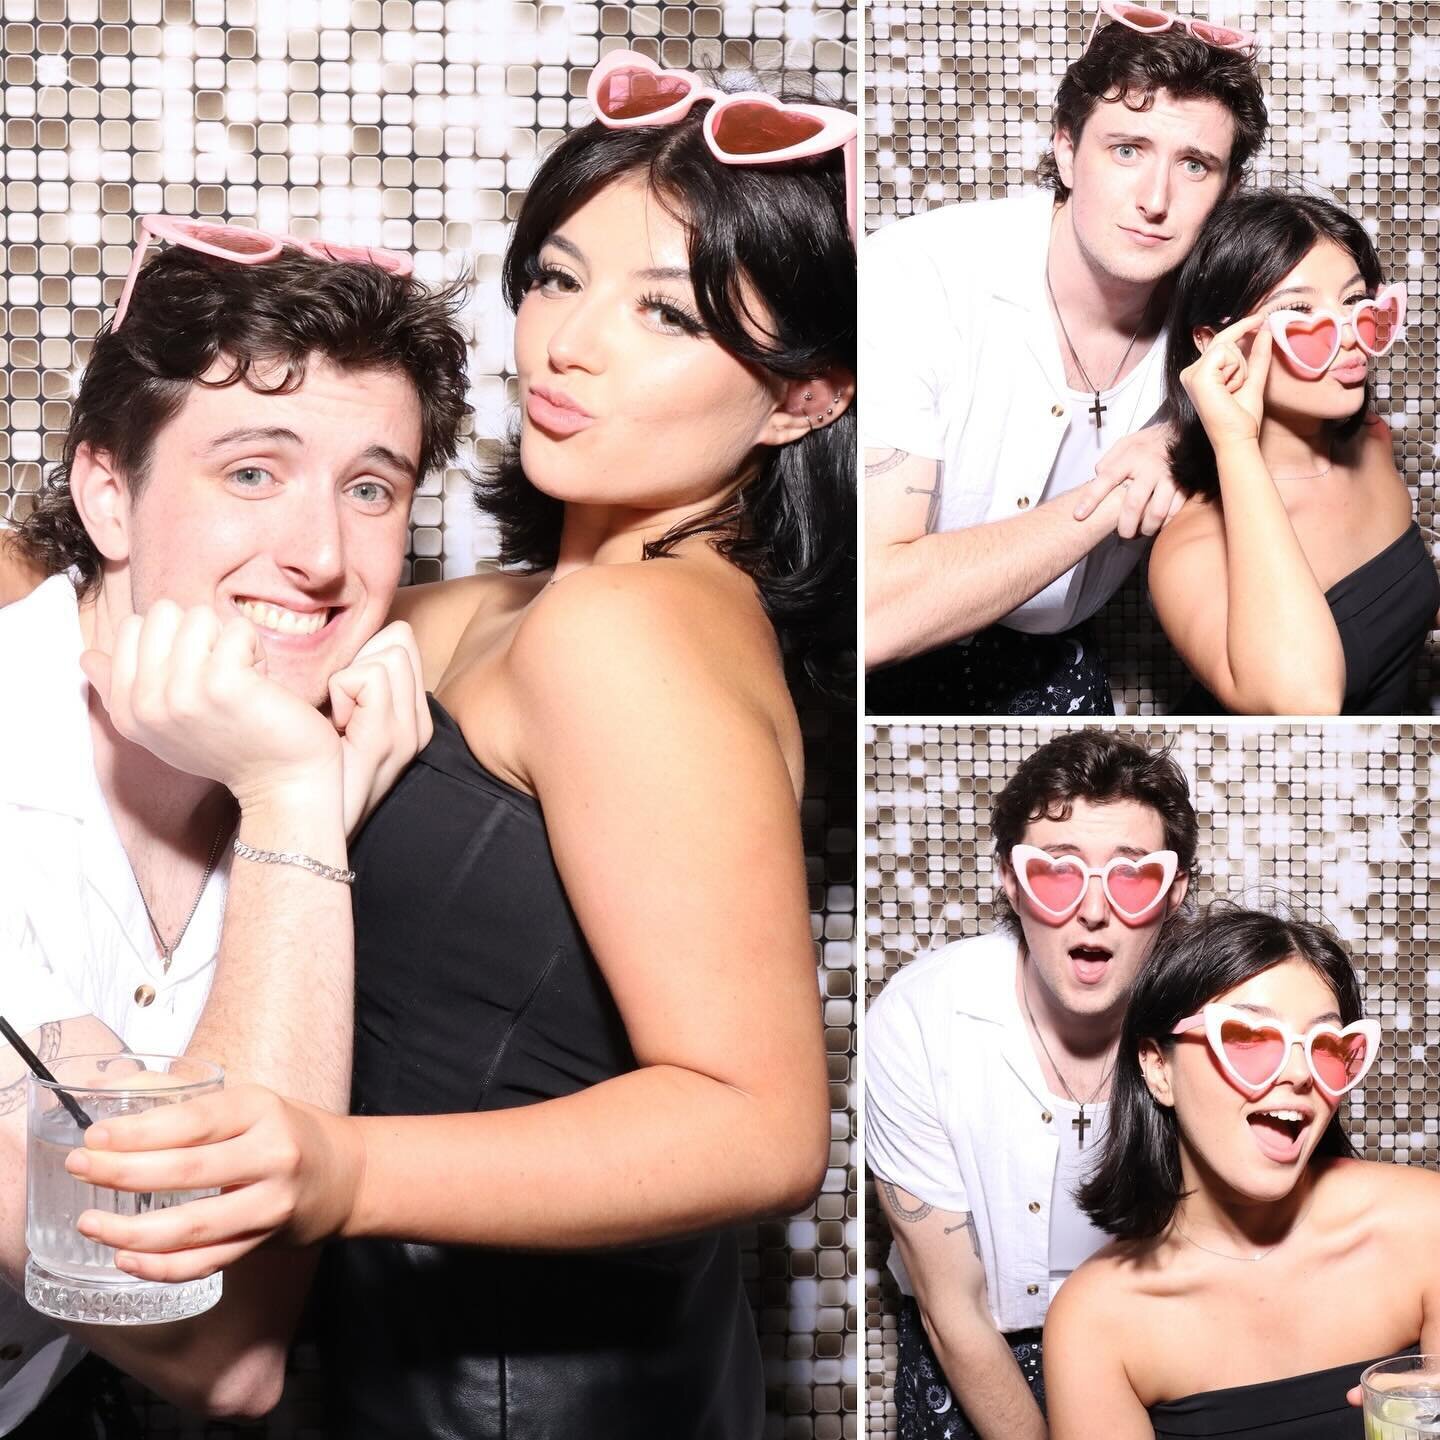 Have you been thinking about hiring a Photo Booth for your next event? Look no further!!! We want to help make your night just that little bit more exciting! Contact us now!! #centralcoastphotobooth #photoboothhirenewcastle #photoboothhirecentralcoas